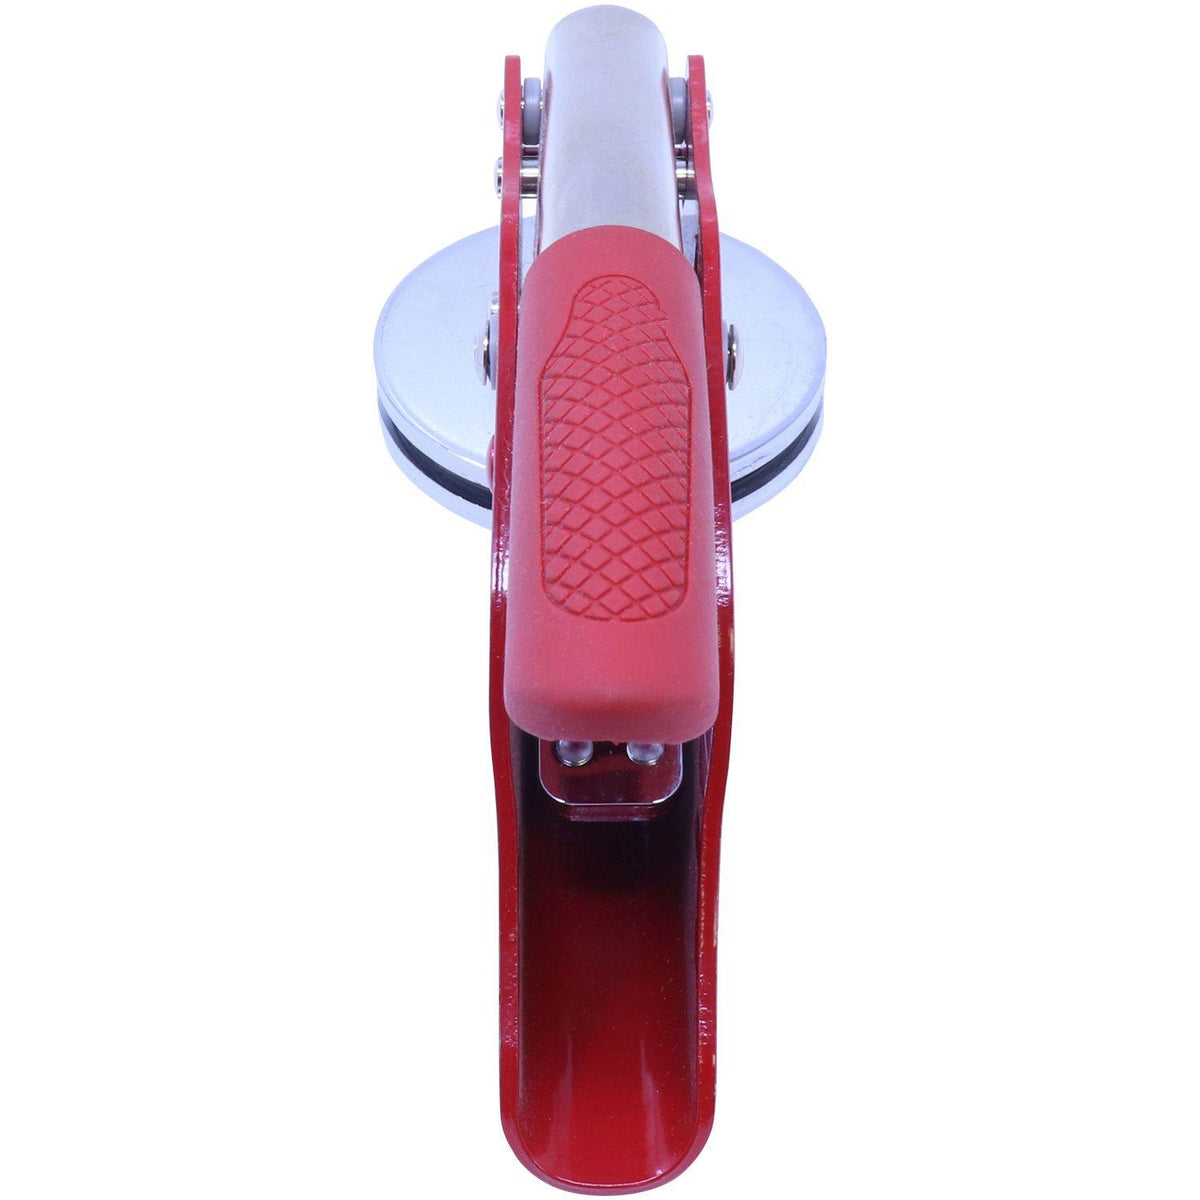 Forester Red Soft Seal Embosser - Engineer Seal Stamps - Embosser Type_Handheld, Embosser Type_Soft Seal, Type of Use_Professional